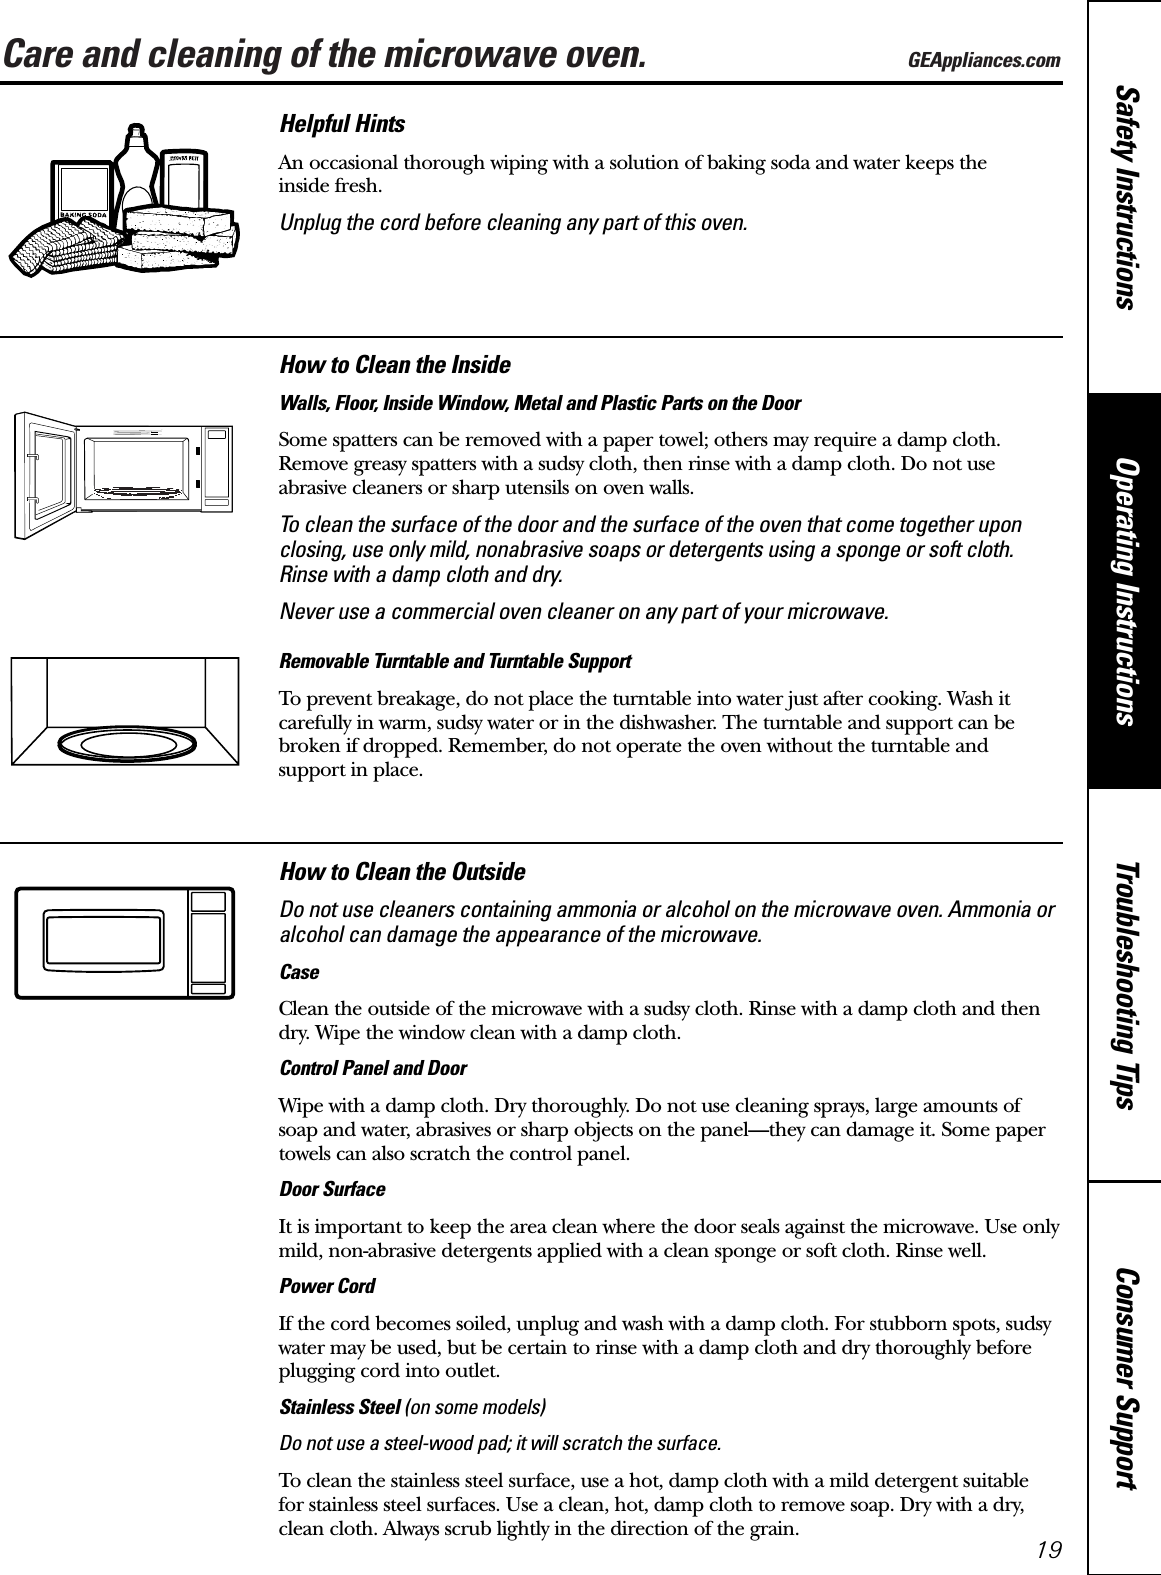 Care and cleaning of the microwave oven. GEAppliances.comConsumer SupportTroubleshooting TipsOperating InstructionsSafety Instructions19Helpful HintsAn occasional thorough wiping with a solution of baking soda and water keeps the inside fresh.Unplug the cord before cleaning any part of this oven.How to Clean the InsideWalls, Floor, Inside Window, Metal and Plastic Parts on the DoorSome spatters can be removed with a paper towel; others may require a damp cloth.Remove greasy spatters with a sudsy cloth, then rinse with a damp cloth. Do not use abrasive cleaners or sharp utensils on oven walls. To clean the surface of the door and the surface of the oven that come together uponclosing, use only mild, nonabrasive soaps or detergents using a sponge or soft cloth.Rinse with a damp cloth and dry.Never use a commercial oven cleaner on any part of your microwave.Removable Turntable and Turntable Support To prevent breakage, do not place the turntable into water just after cooking. Wash itcarefully in warm, sudsy water or in the dishwasher. The turntable and support can bebroken if dropped. Remember, do not operate the oven without the turntable and support in place.How to Clean the OutsideDo not use cleaners containing ammonia or alcohol on the microwave oven. Ammonia oralcohol can damage the appearance of the microwave.CaseClean the outside of the microwave with a sudsy cloth. Rinse with a damp cloth and thendry. Wipe the window clean with a damp cloth. Control Panel and DoorWipe with a damp cloth. Dry thoroughly. Do not use cleaning sprays, large amounts ofsoap and water, abrasives or sharp objects on the panel—they can damage it. Some papertowels can also scratch the control panel.Door SurfaceIt is important to keep the area clean where the door seals against the microwave. Use onlymild, non-abrasive detergents applied with a clean sponge or soft cloth. Rinse well.Power CordIf the cord becomes soiled, unplug and wash with a damp cloth. For stubborn spots, sudsywater may be used, but be certain to rinse with a damp cloth and dry thoroughly beforeplugging cord into outlet.Stainless Steel (on some models)Do not use a steel-wood pad; it will scratch the surface.To clean the stainless steel surface, use a hot, damp cloth with a mild detergent suitable for stainless steel surfaces. Use a clean, hot, damp cloth to remove soap. Dry with a dry,clean cloth. Always scrub lightly in the direction of the grain.